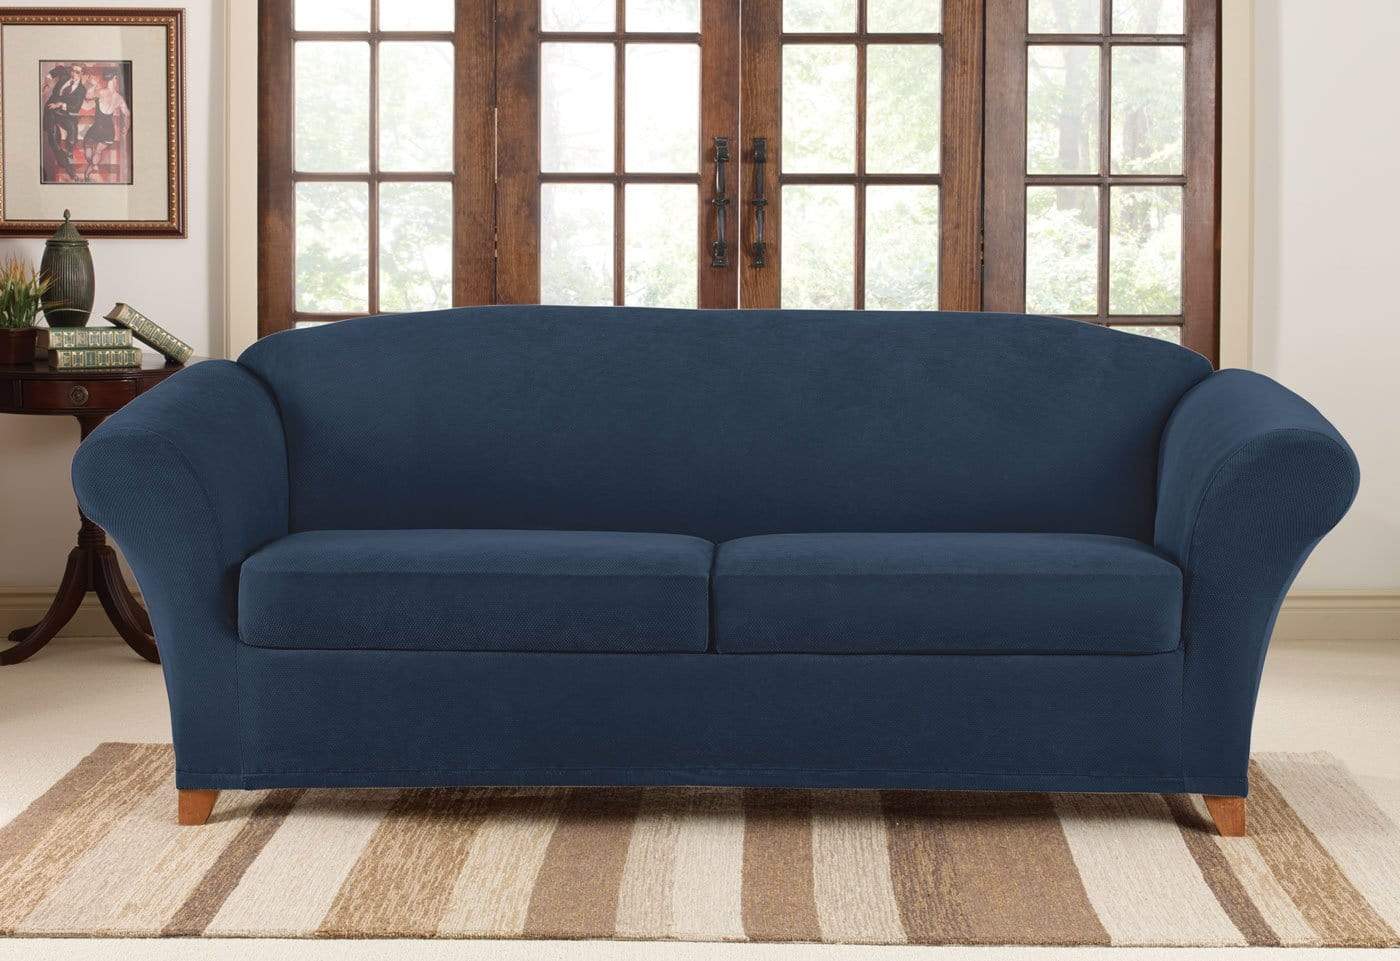 SureFit Stretch Piqué Three Piece Sofa Slipcover   Form-Fitting   Individual Cushion Covers   Machine Washable in Navy Blue